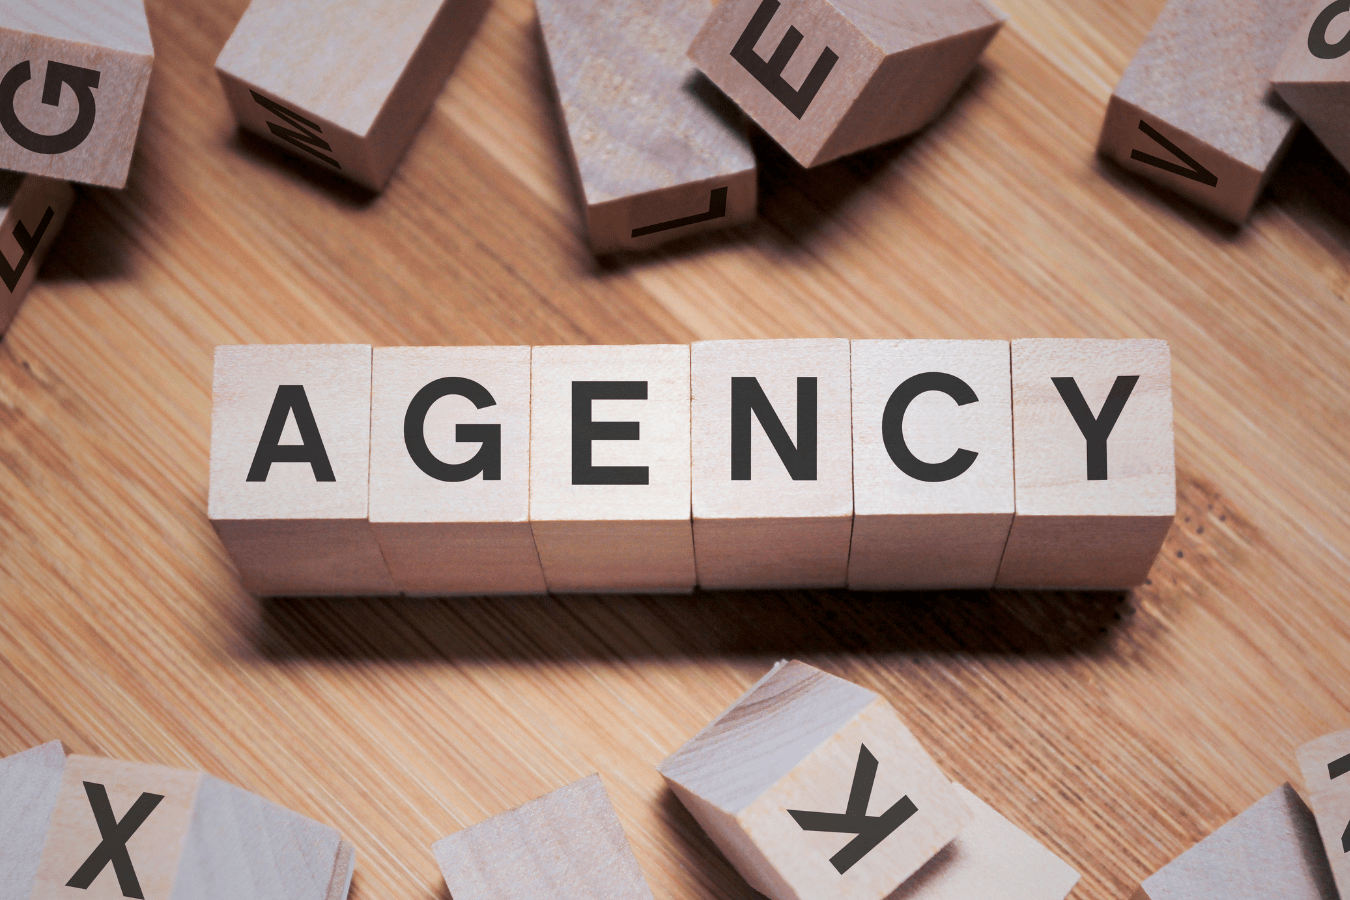 agency written on blocks: digital marketing agency vs in-house pros and cons